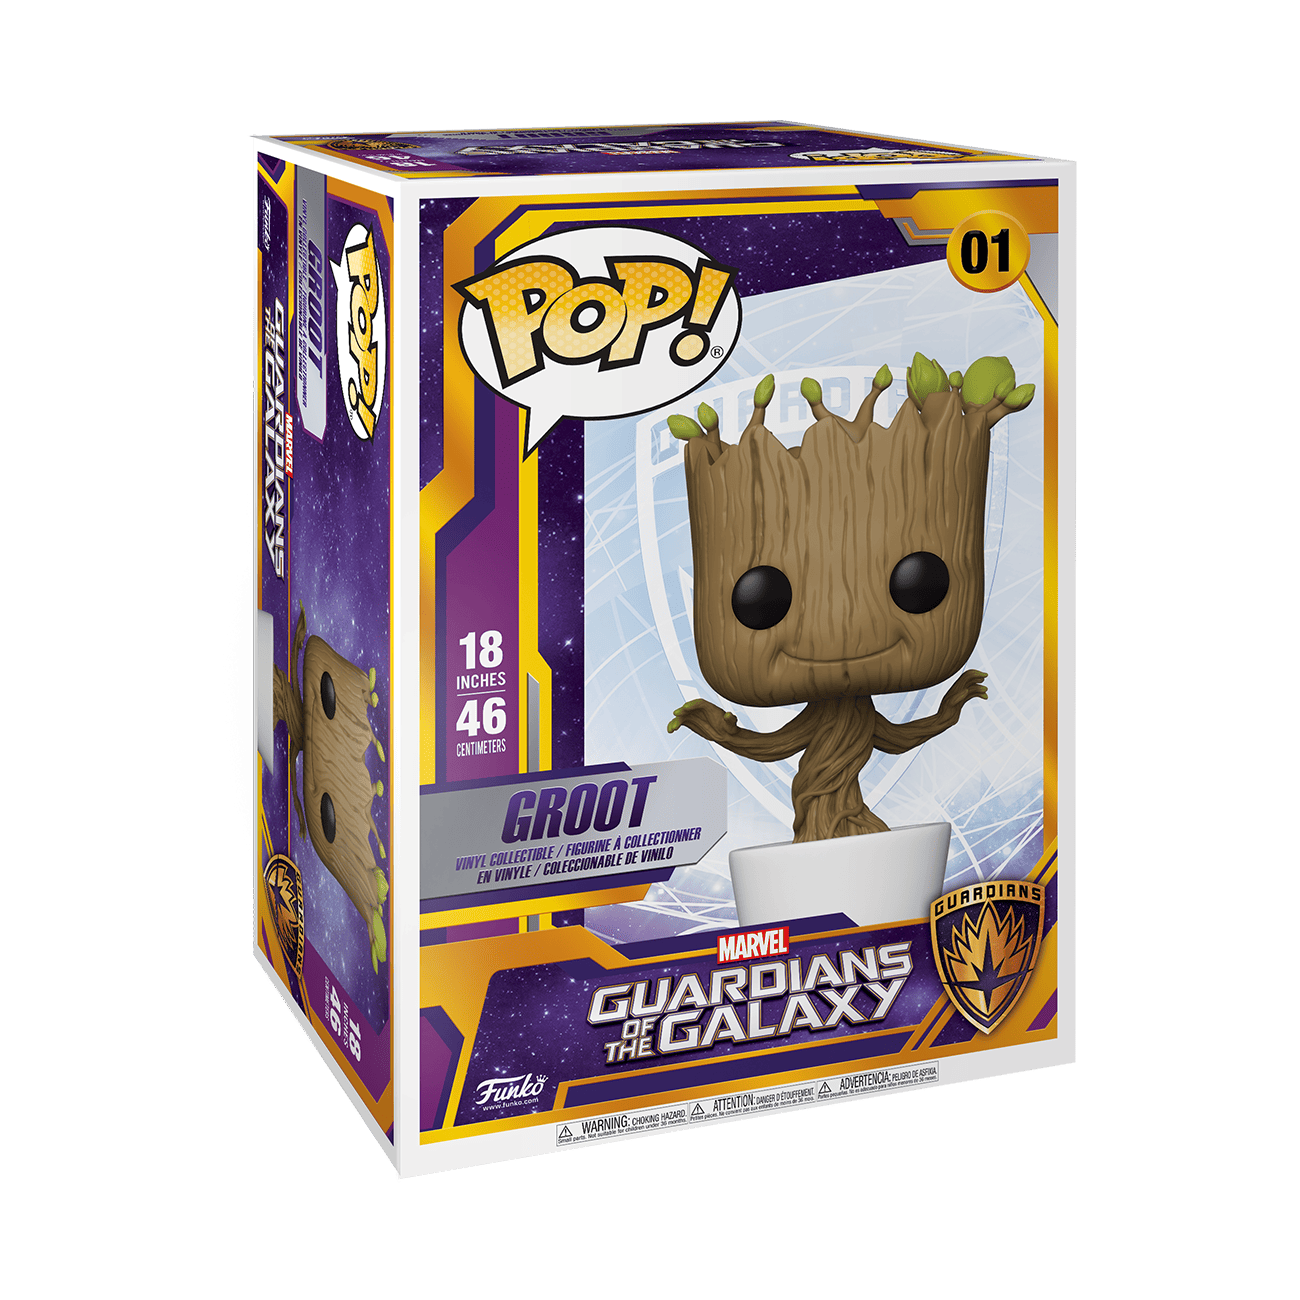 Pops! - The Sizes, Terms, and